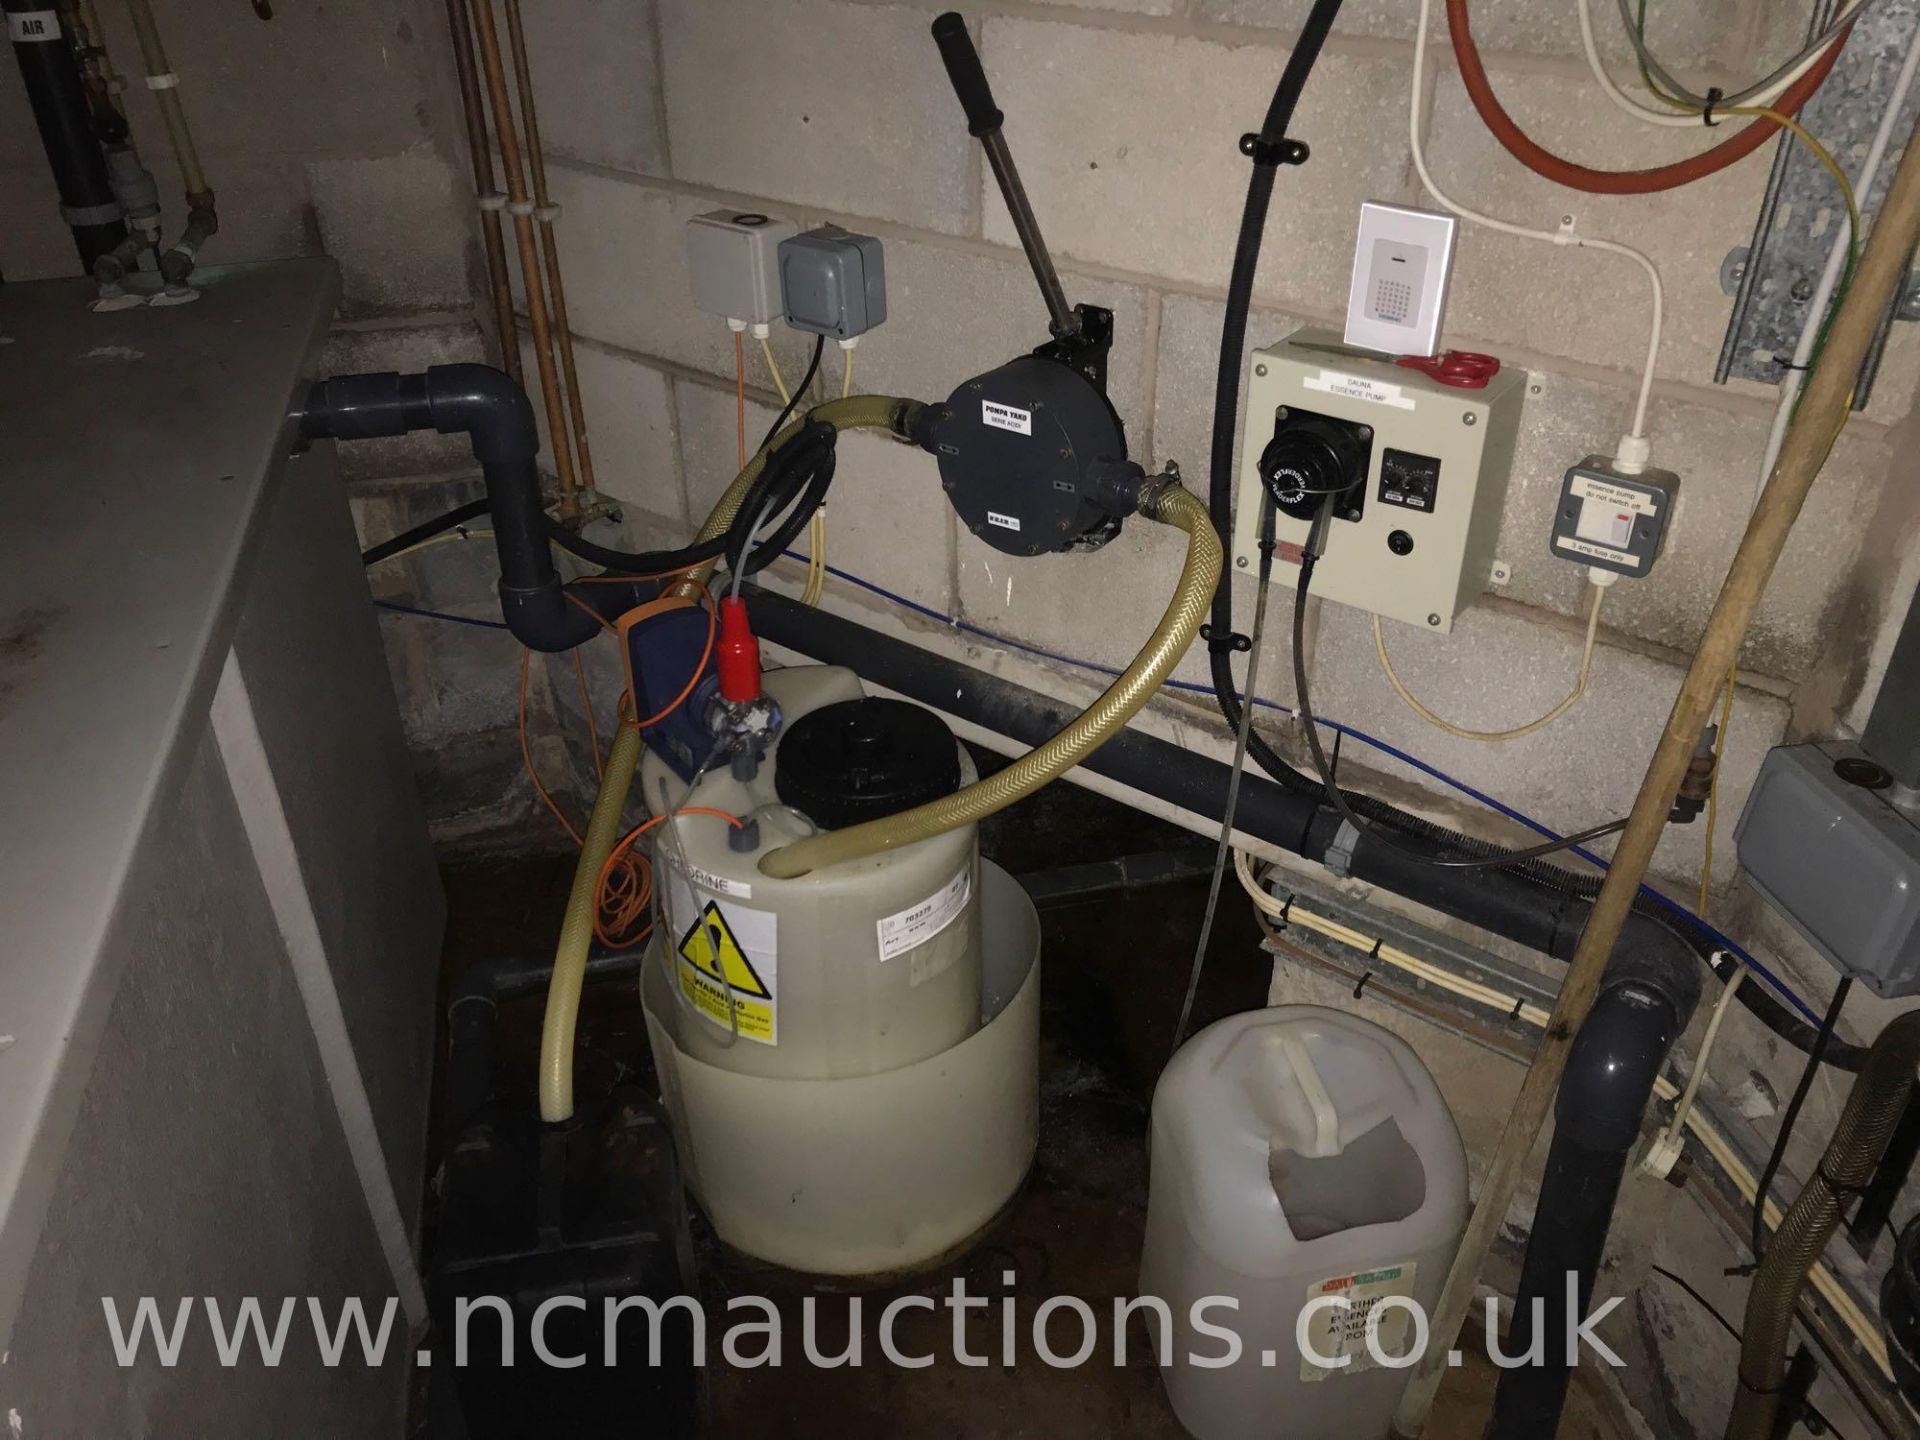 Contents of water treatment room - Image 2 of 5